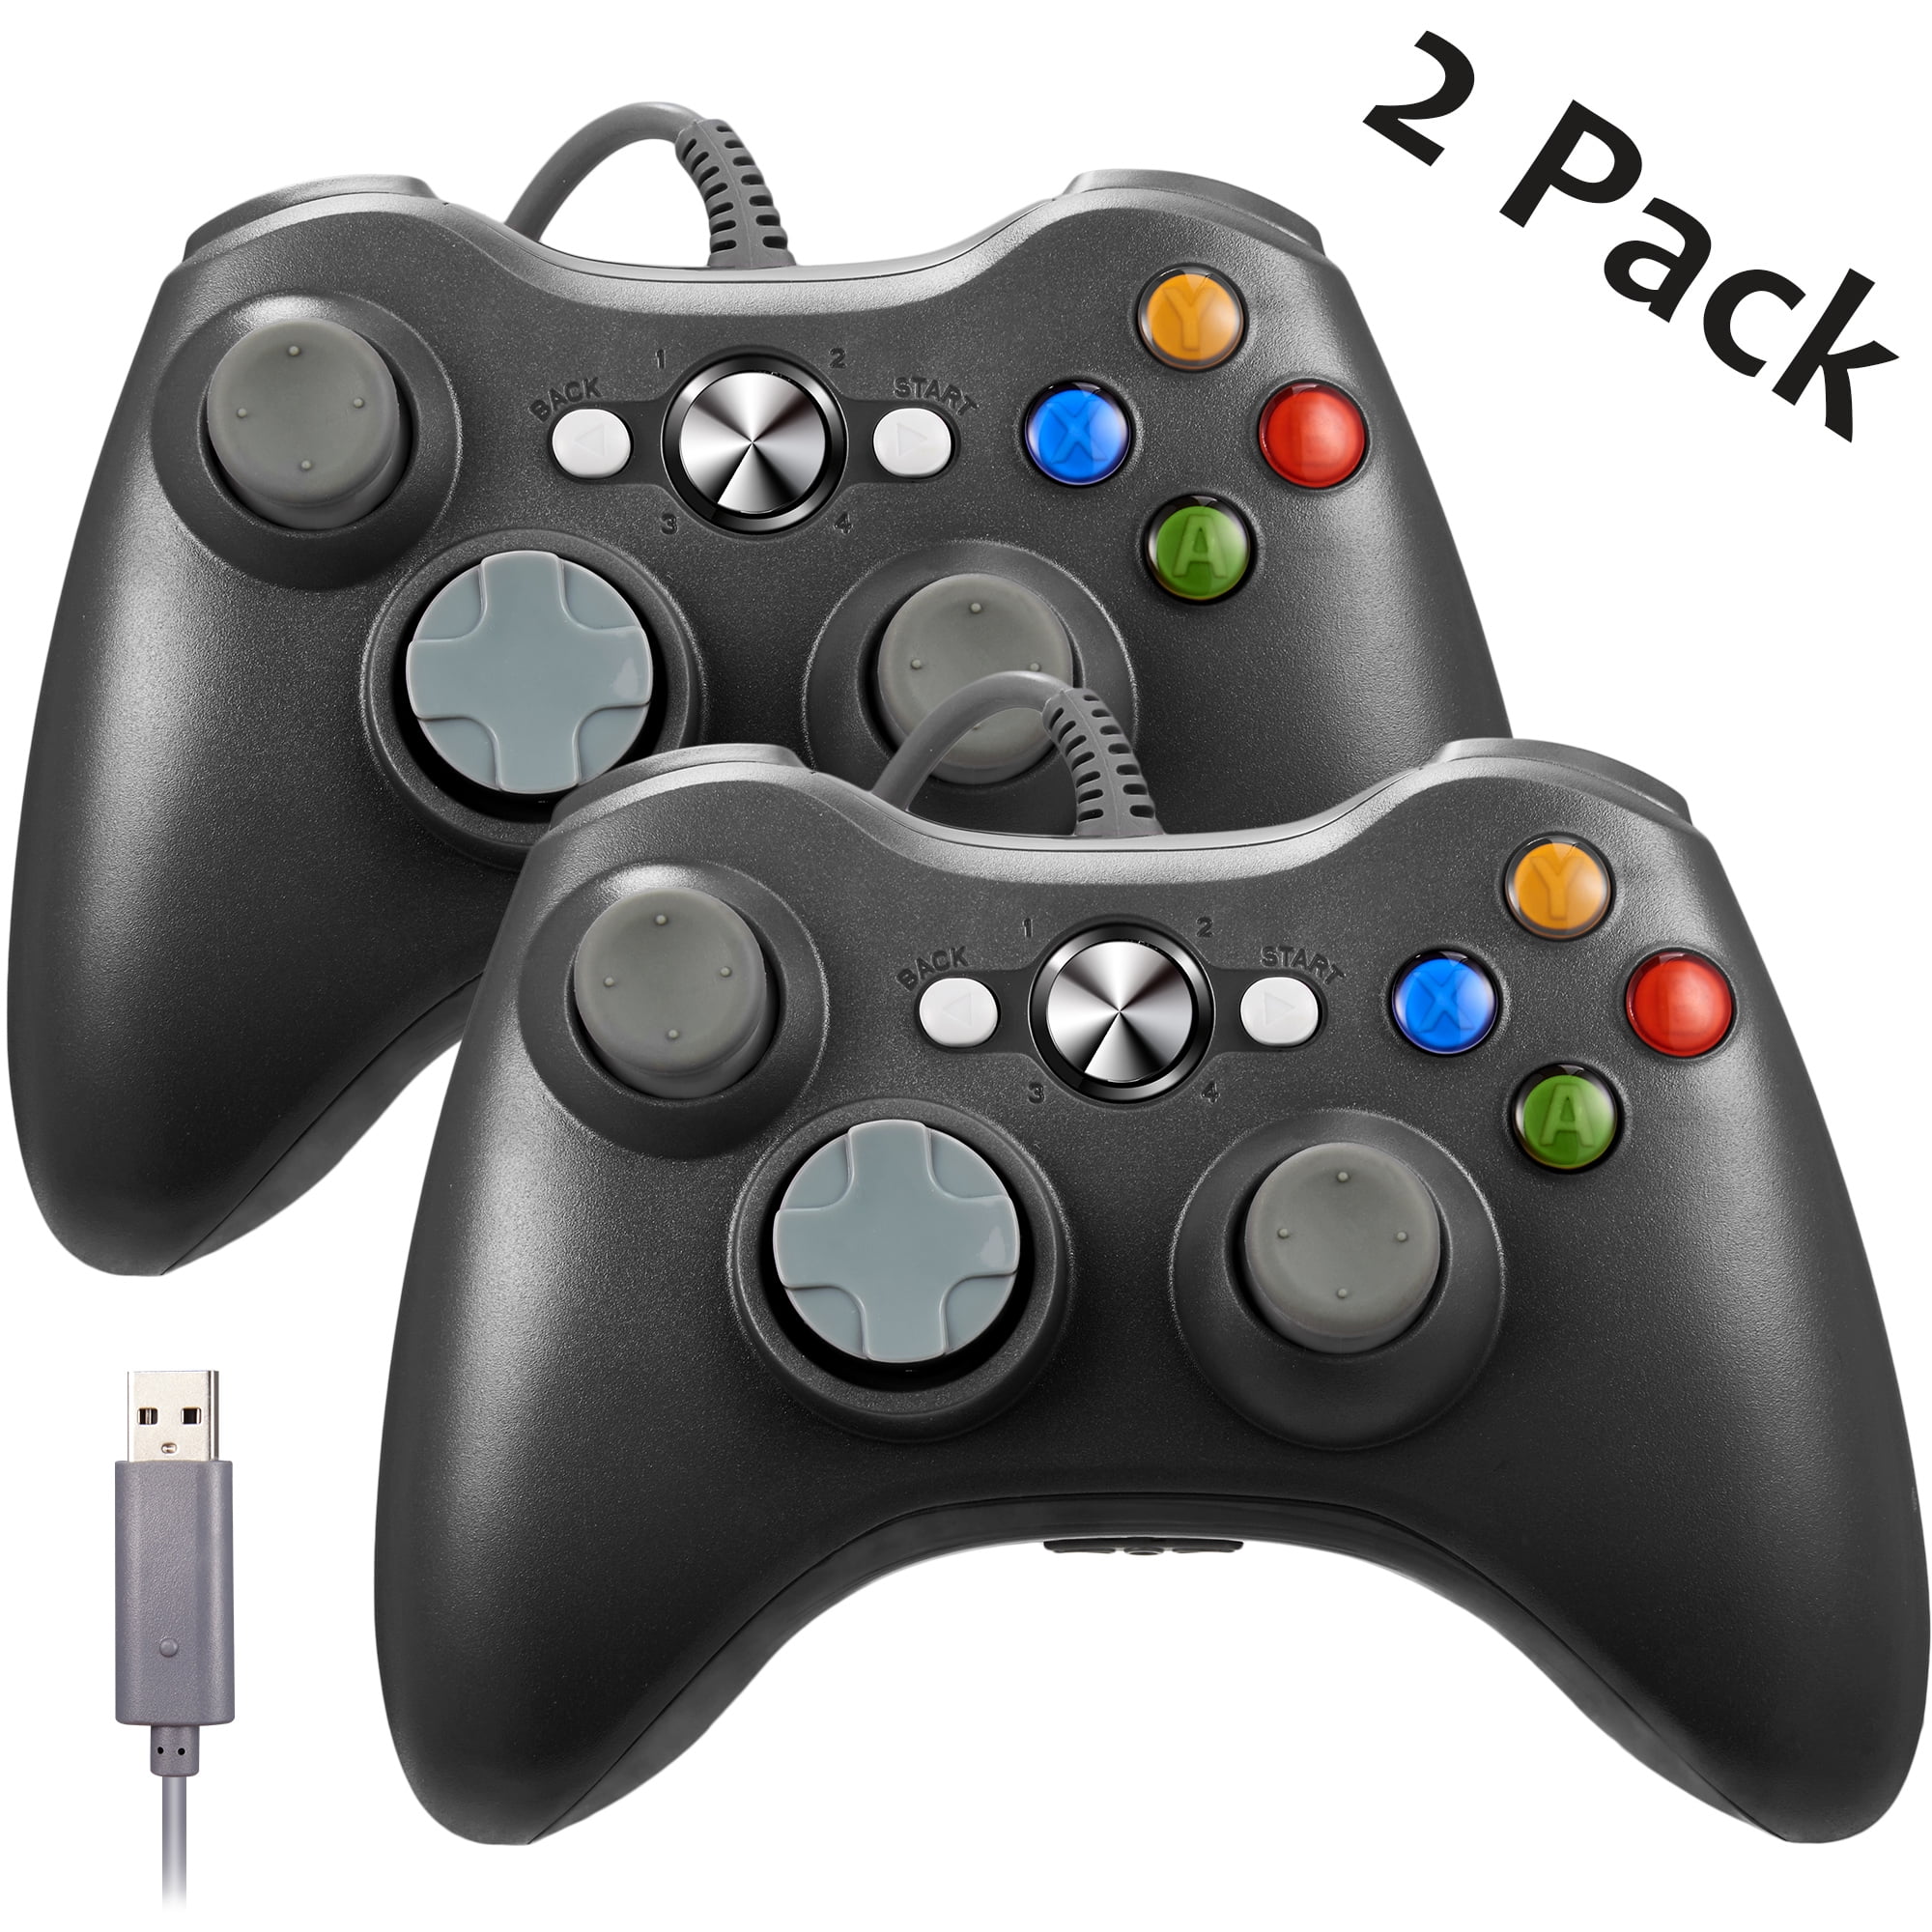 miadore-2pack-xbox-360-controller-wired-controller-for-xbox-360-pc-and